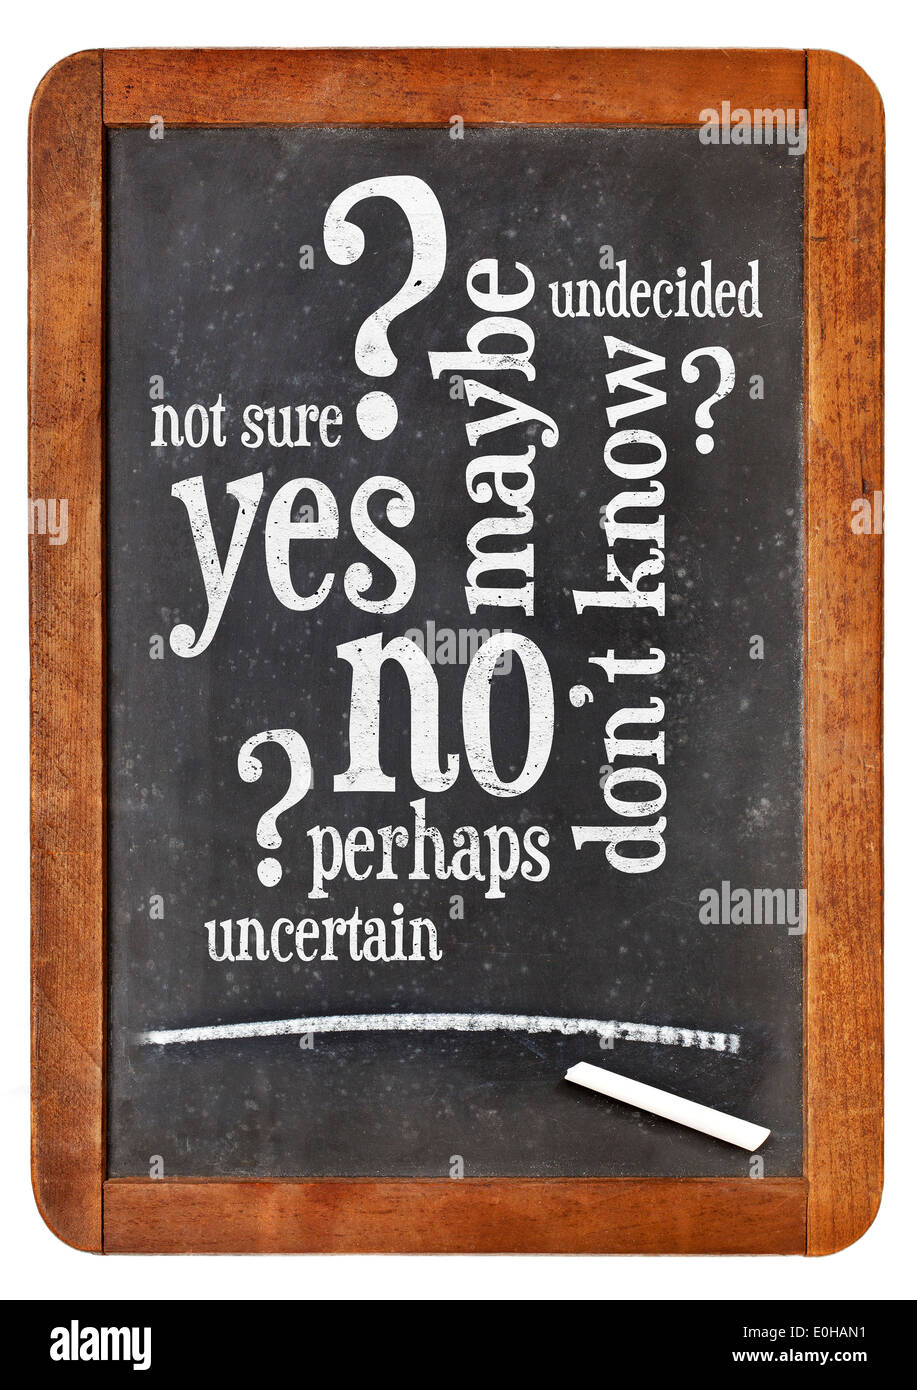 undecided concept - yes, no, maybe word cloud on a vintage blackboard Stock Photo